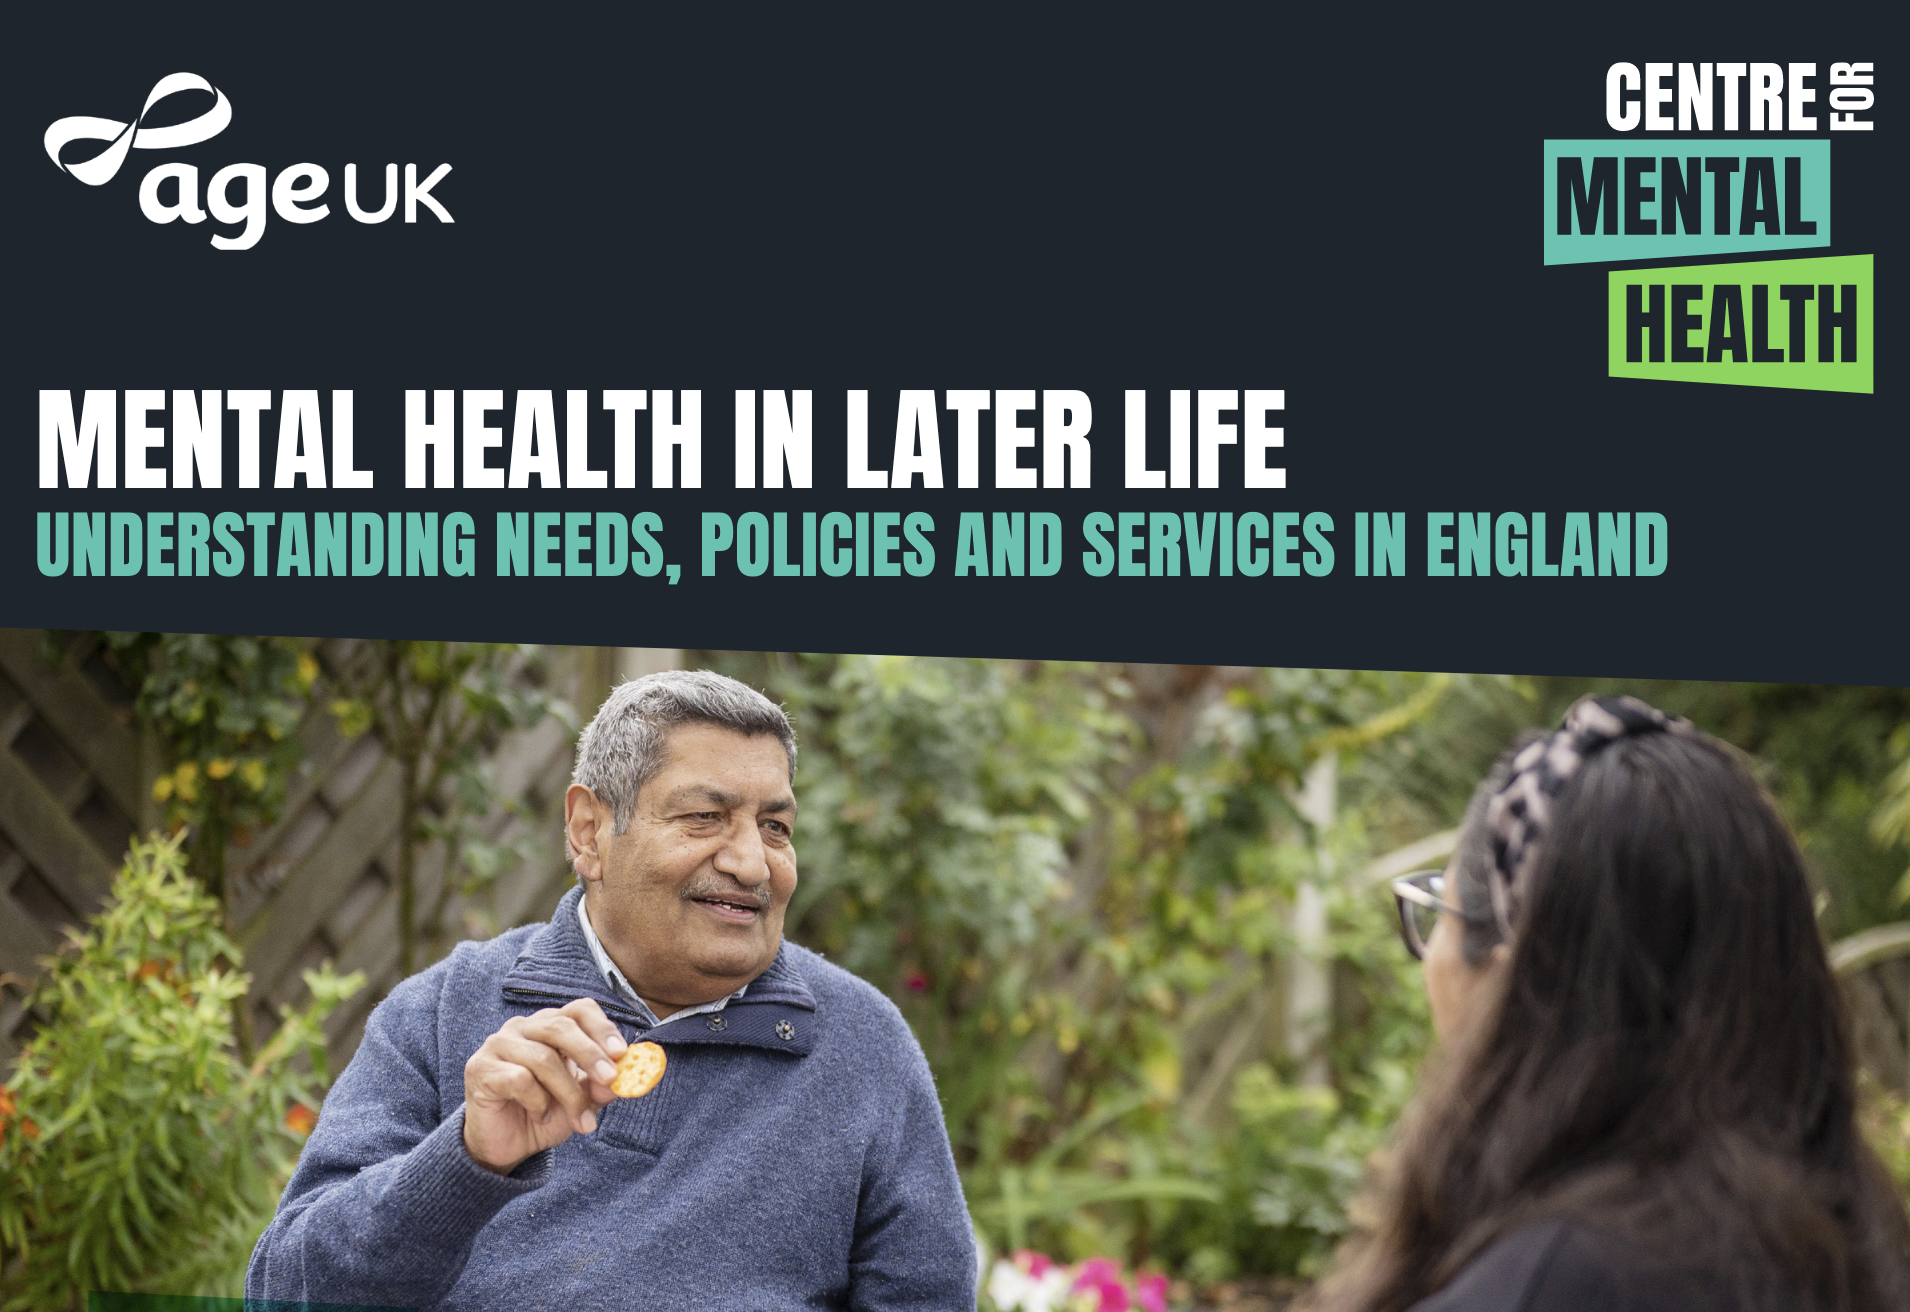 Older people’s mental health “being overlooked” through ageism and discrimination